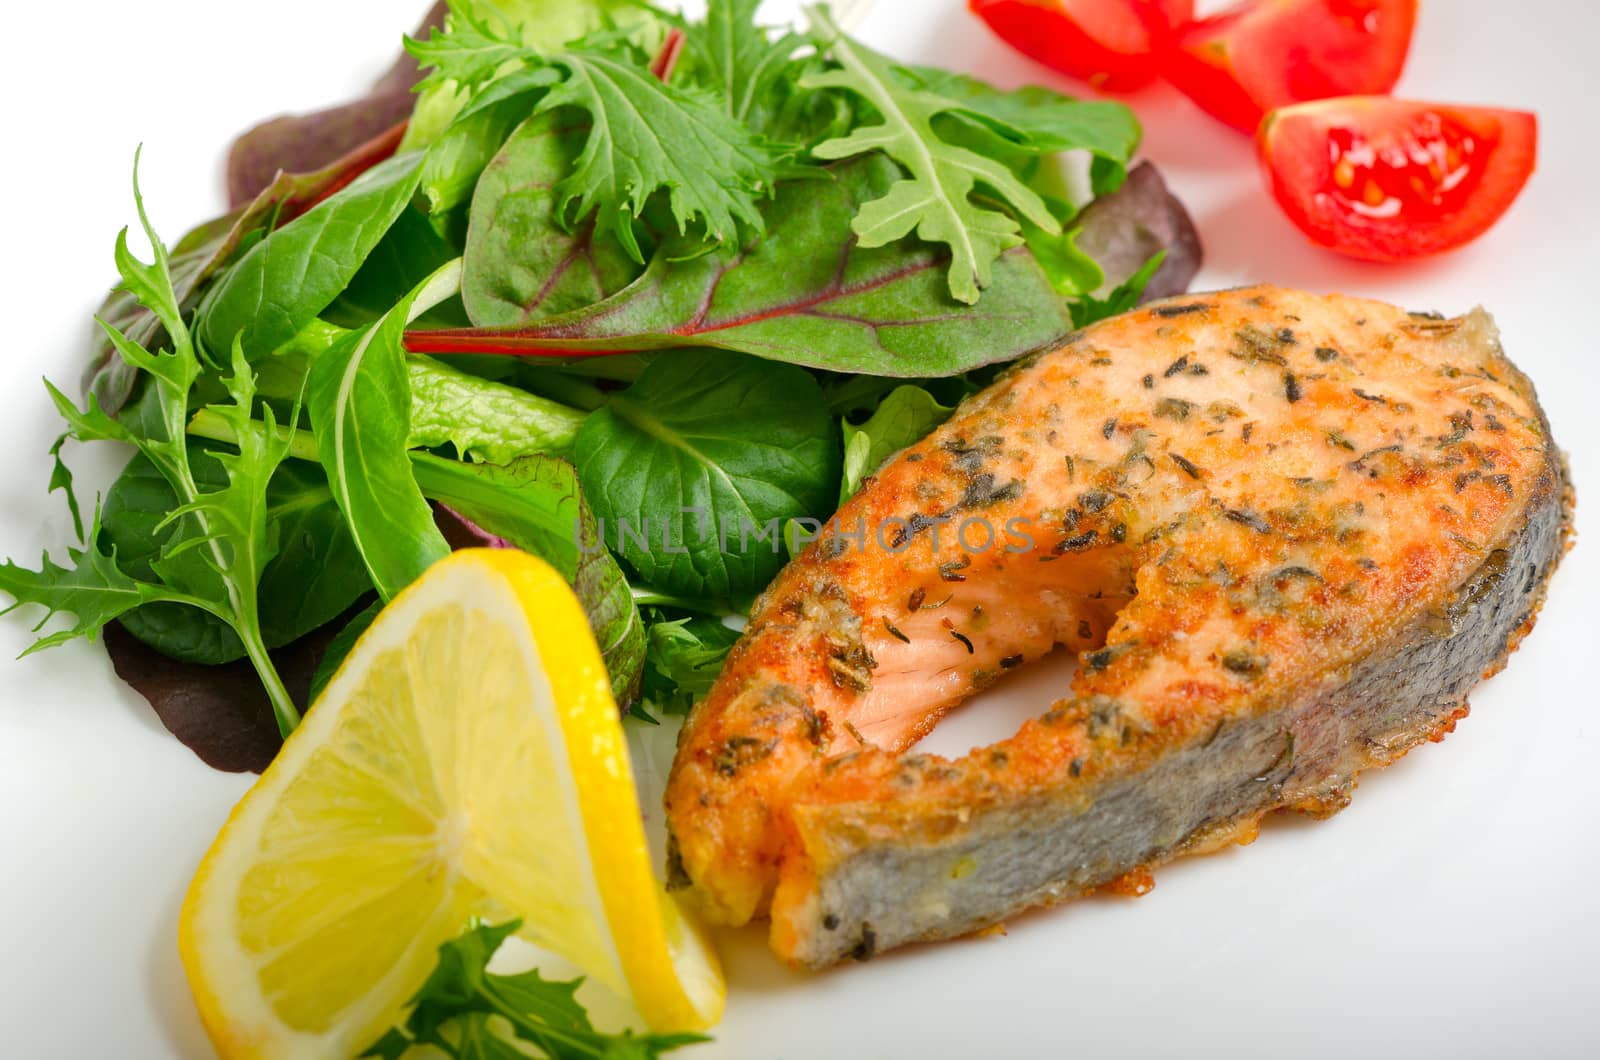 Fish: Grilled salmon with vegetables by morskaja